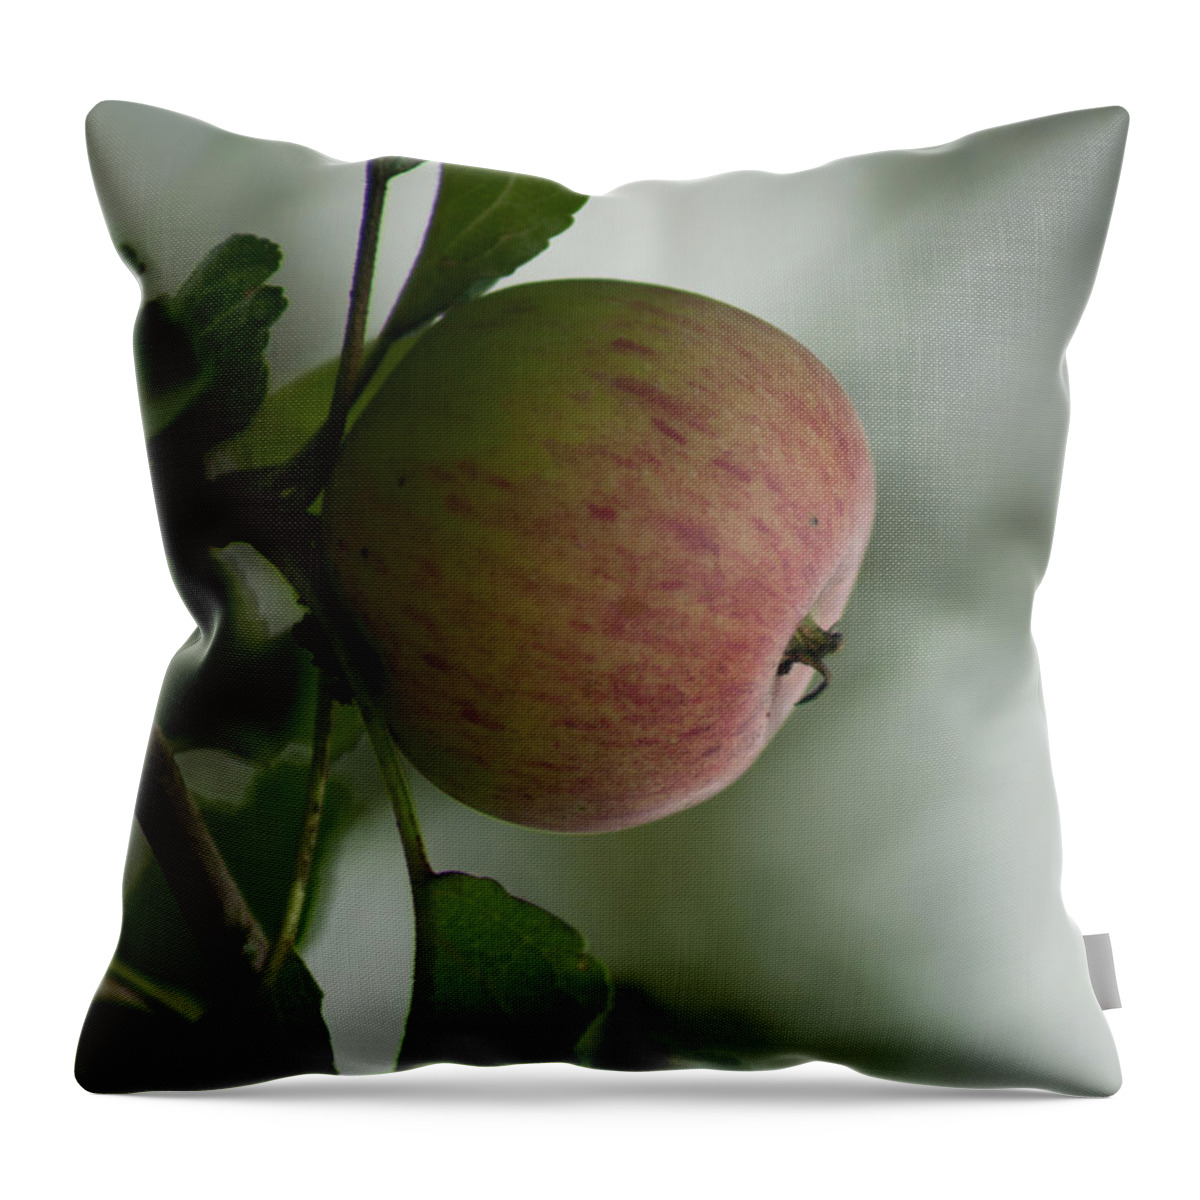 Miguel Throw Pillow featuring the photograph Apple in the Tree by Miguel Winterpacht